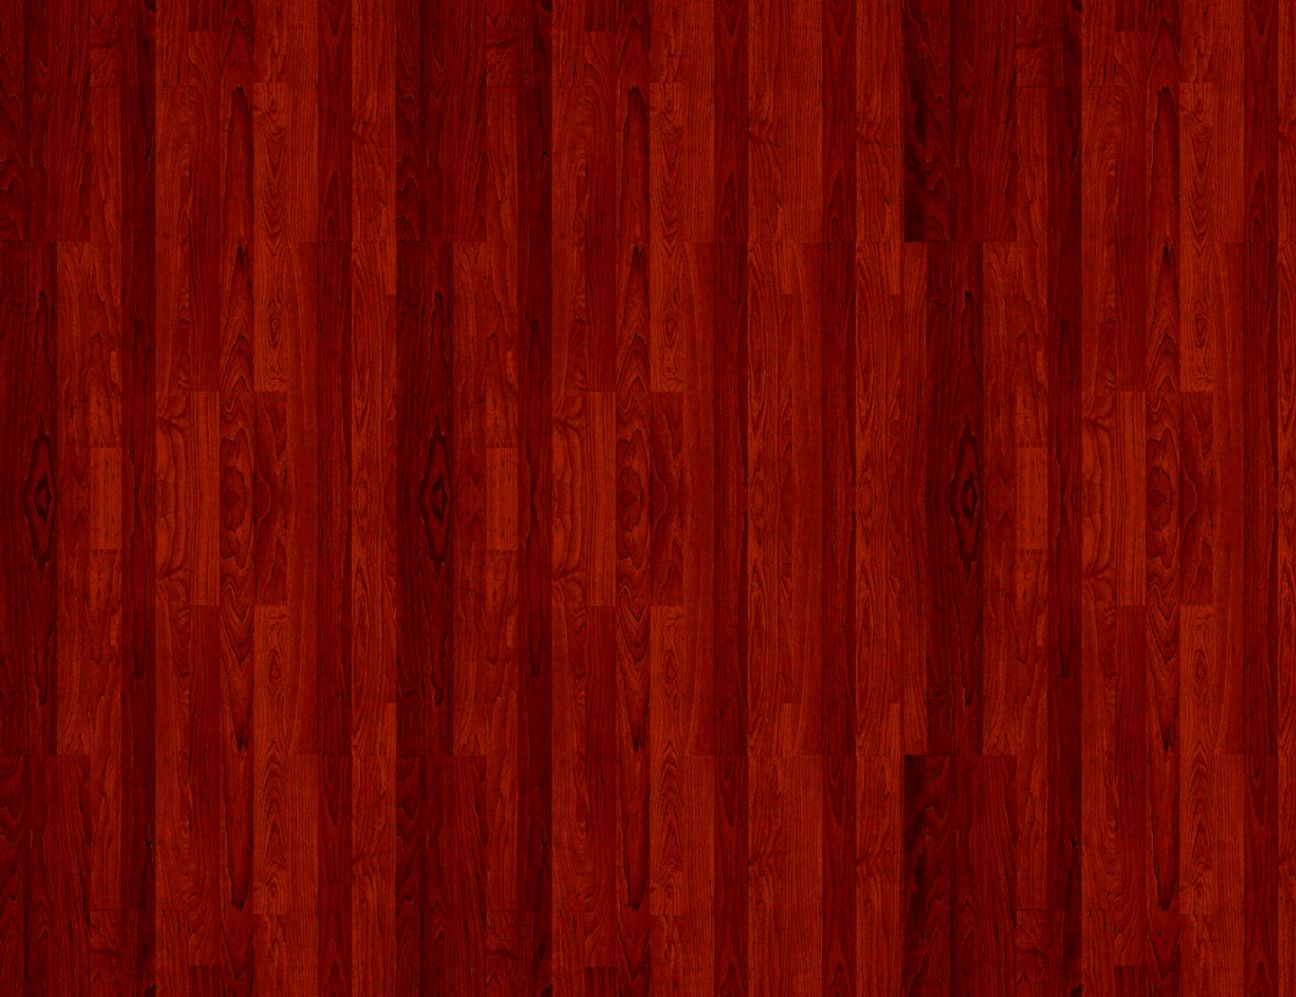 197 Wood Hd Wallpapers Background Images Wallpaper - Plank - HD Wallpaper 